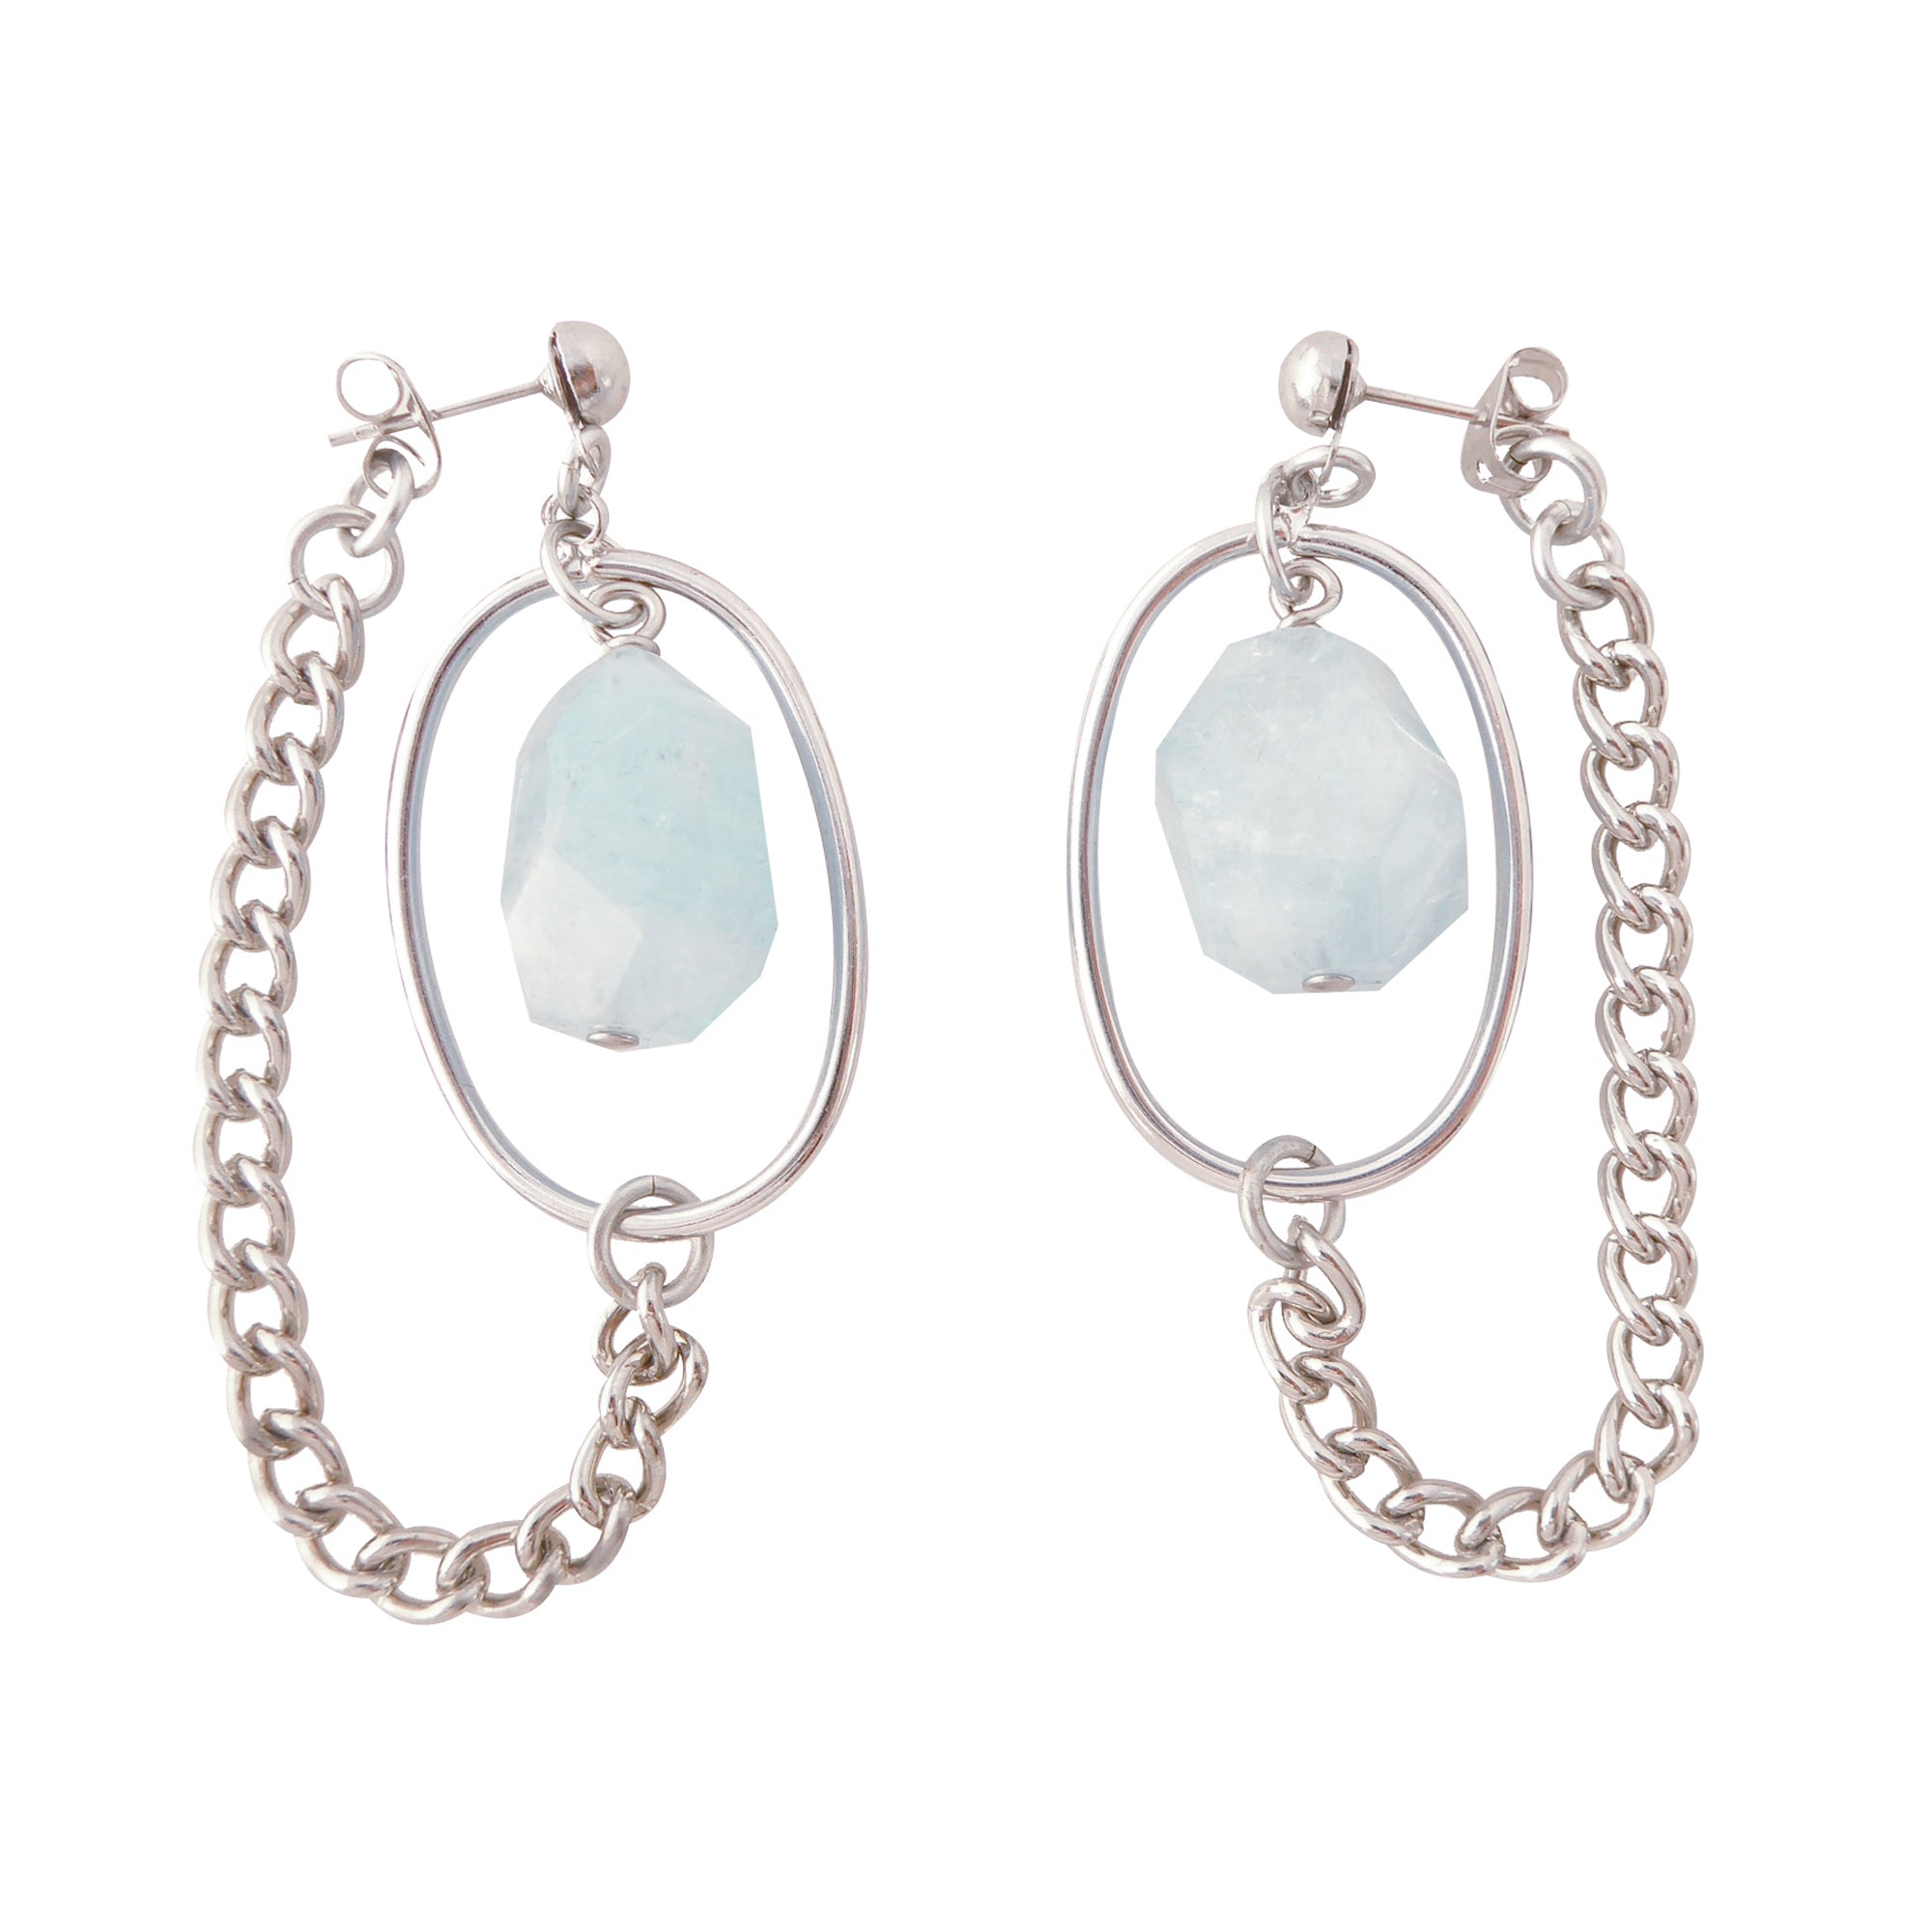 Silver saturn earrings in aquamarine by Jenny Dayco 1